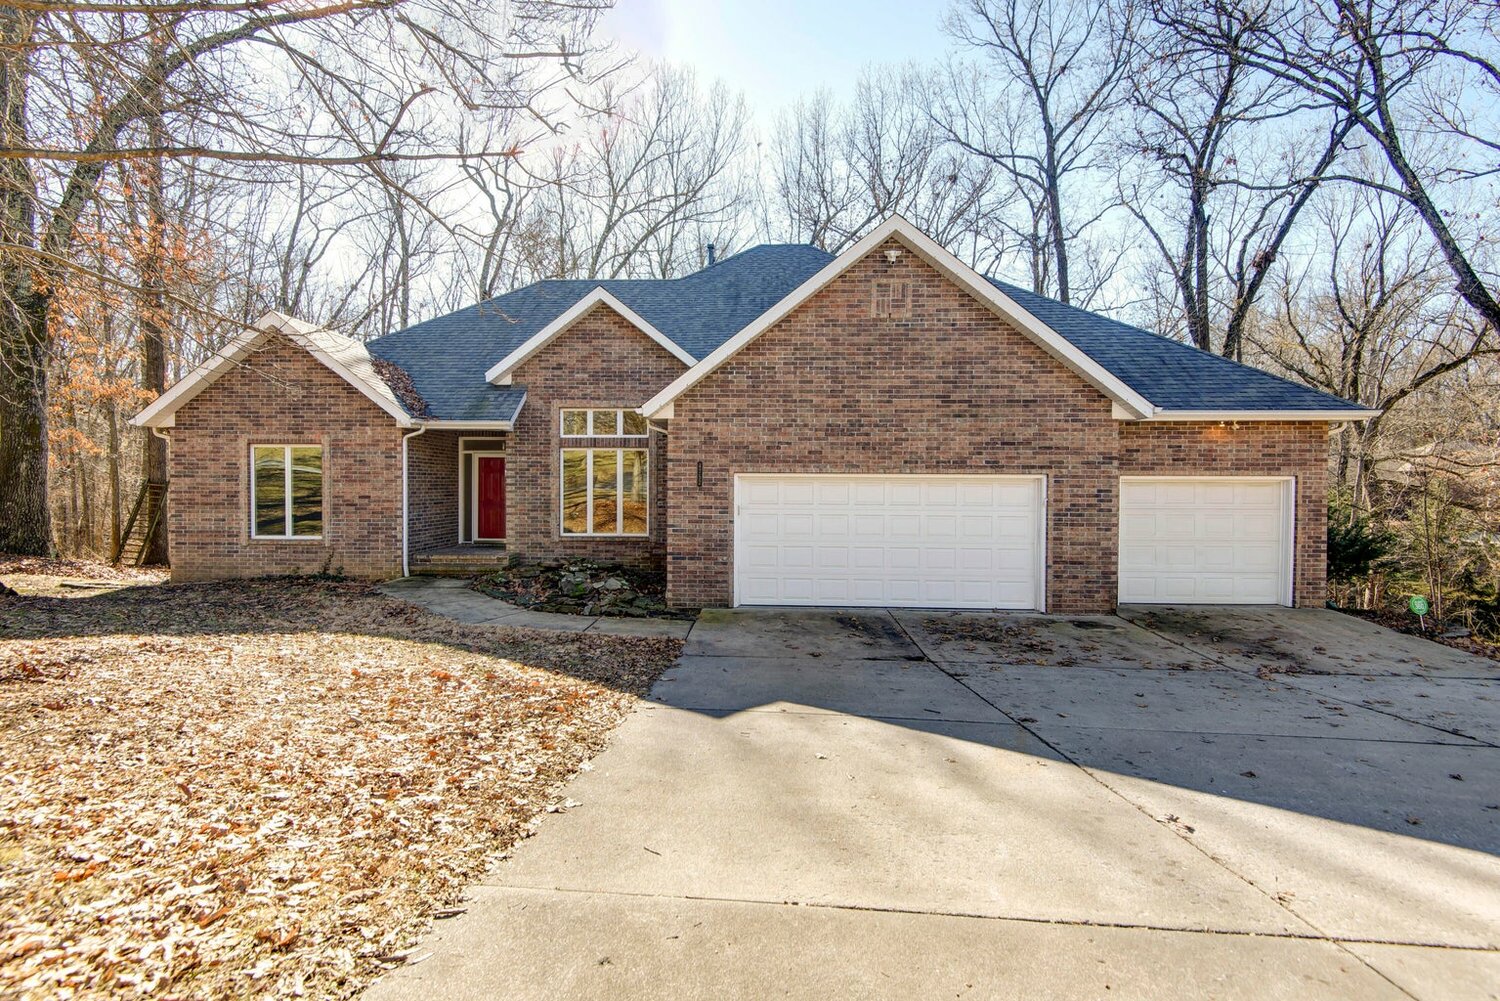 4752 E. Trailwood Way
$548,800
Bedrooms: 4
Bathrooms: 4
Listing firm: Team Ozarks Realty